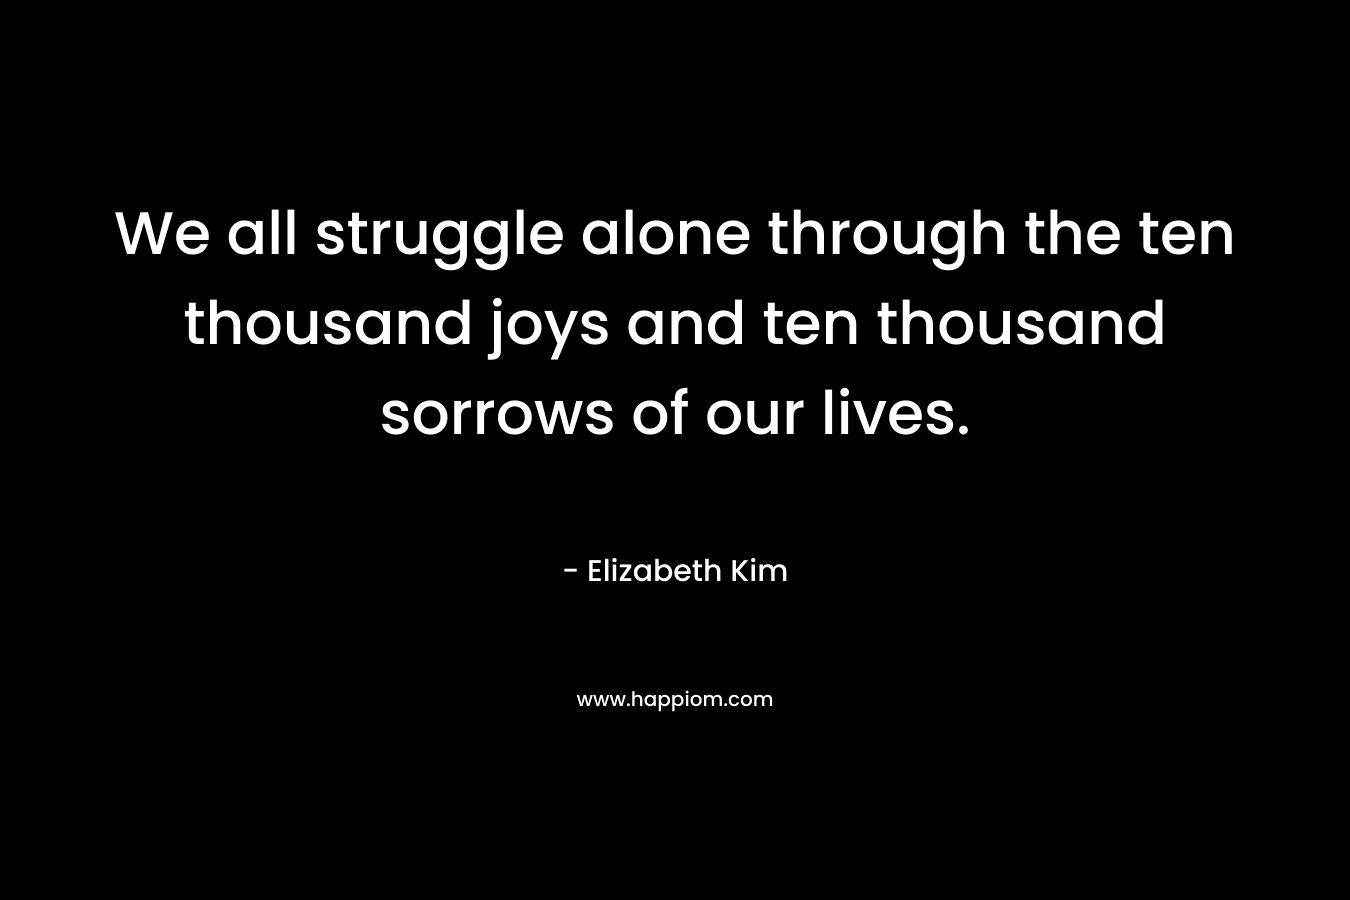 We all struggle alone through the ten thousand joys and ten thousand sorrows of our lives.